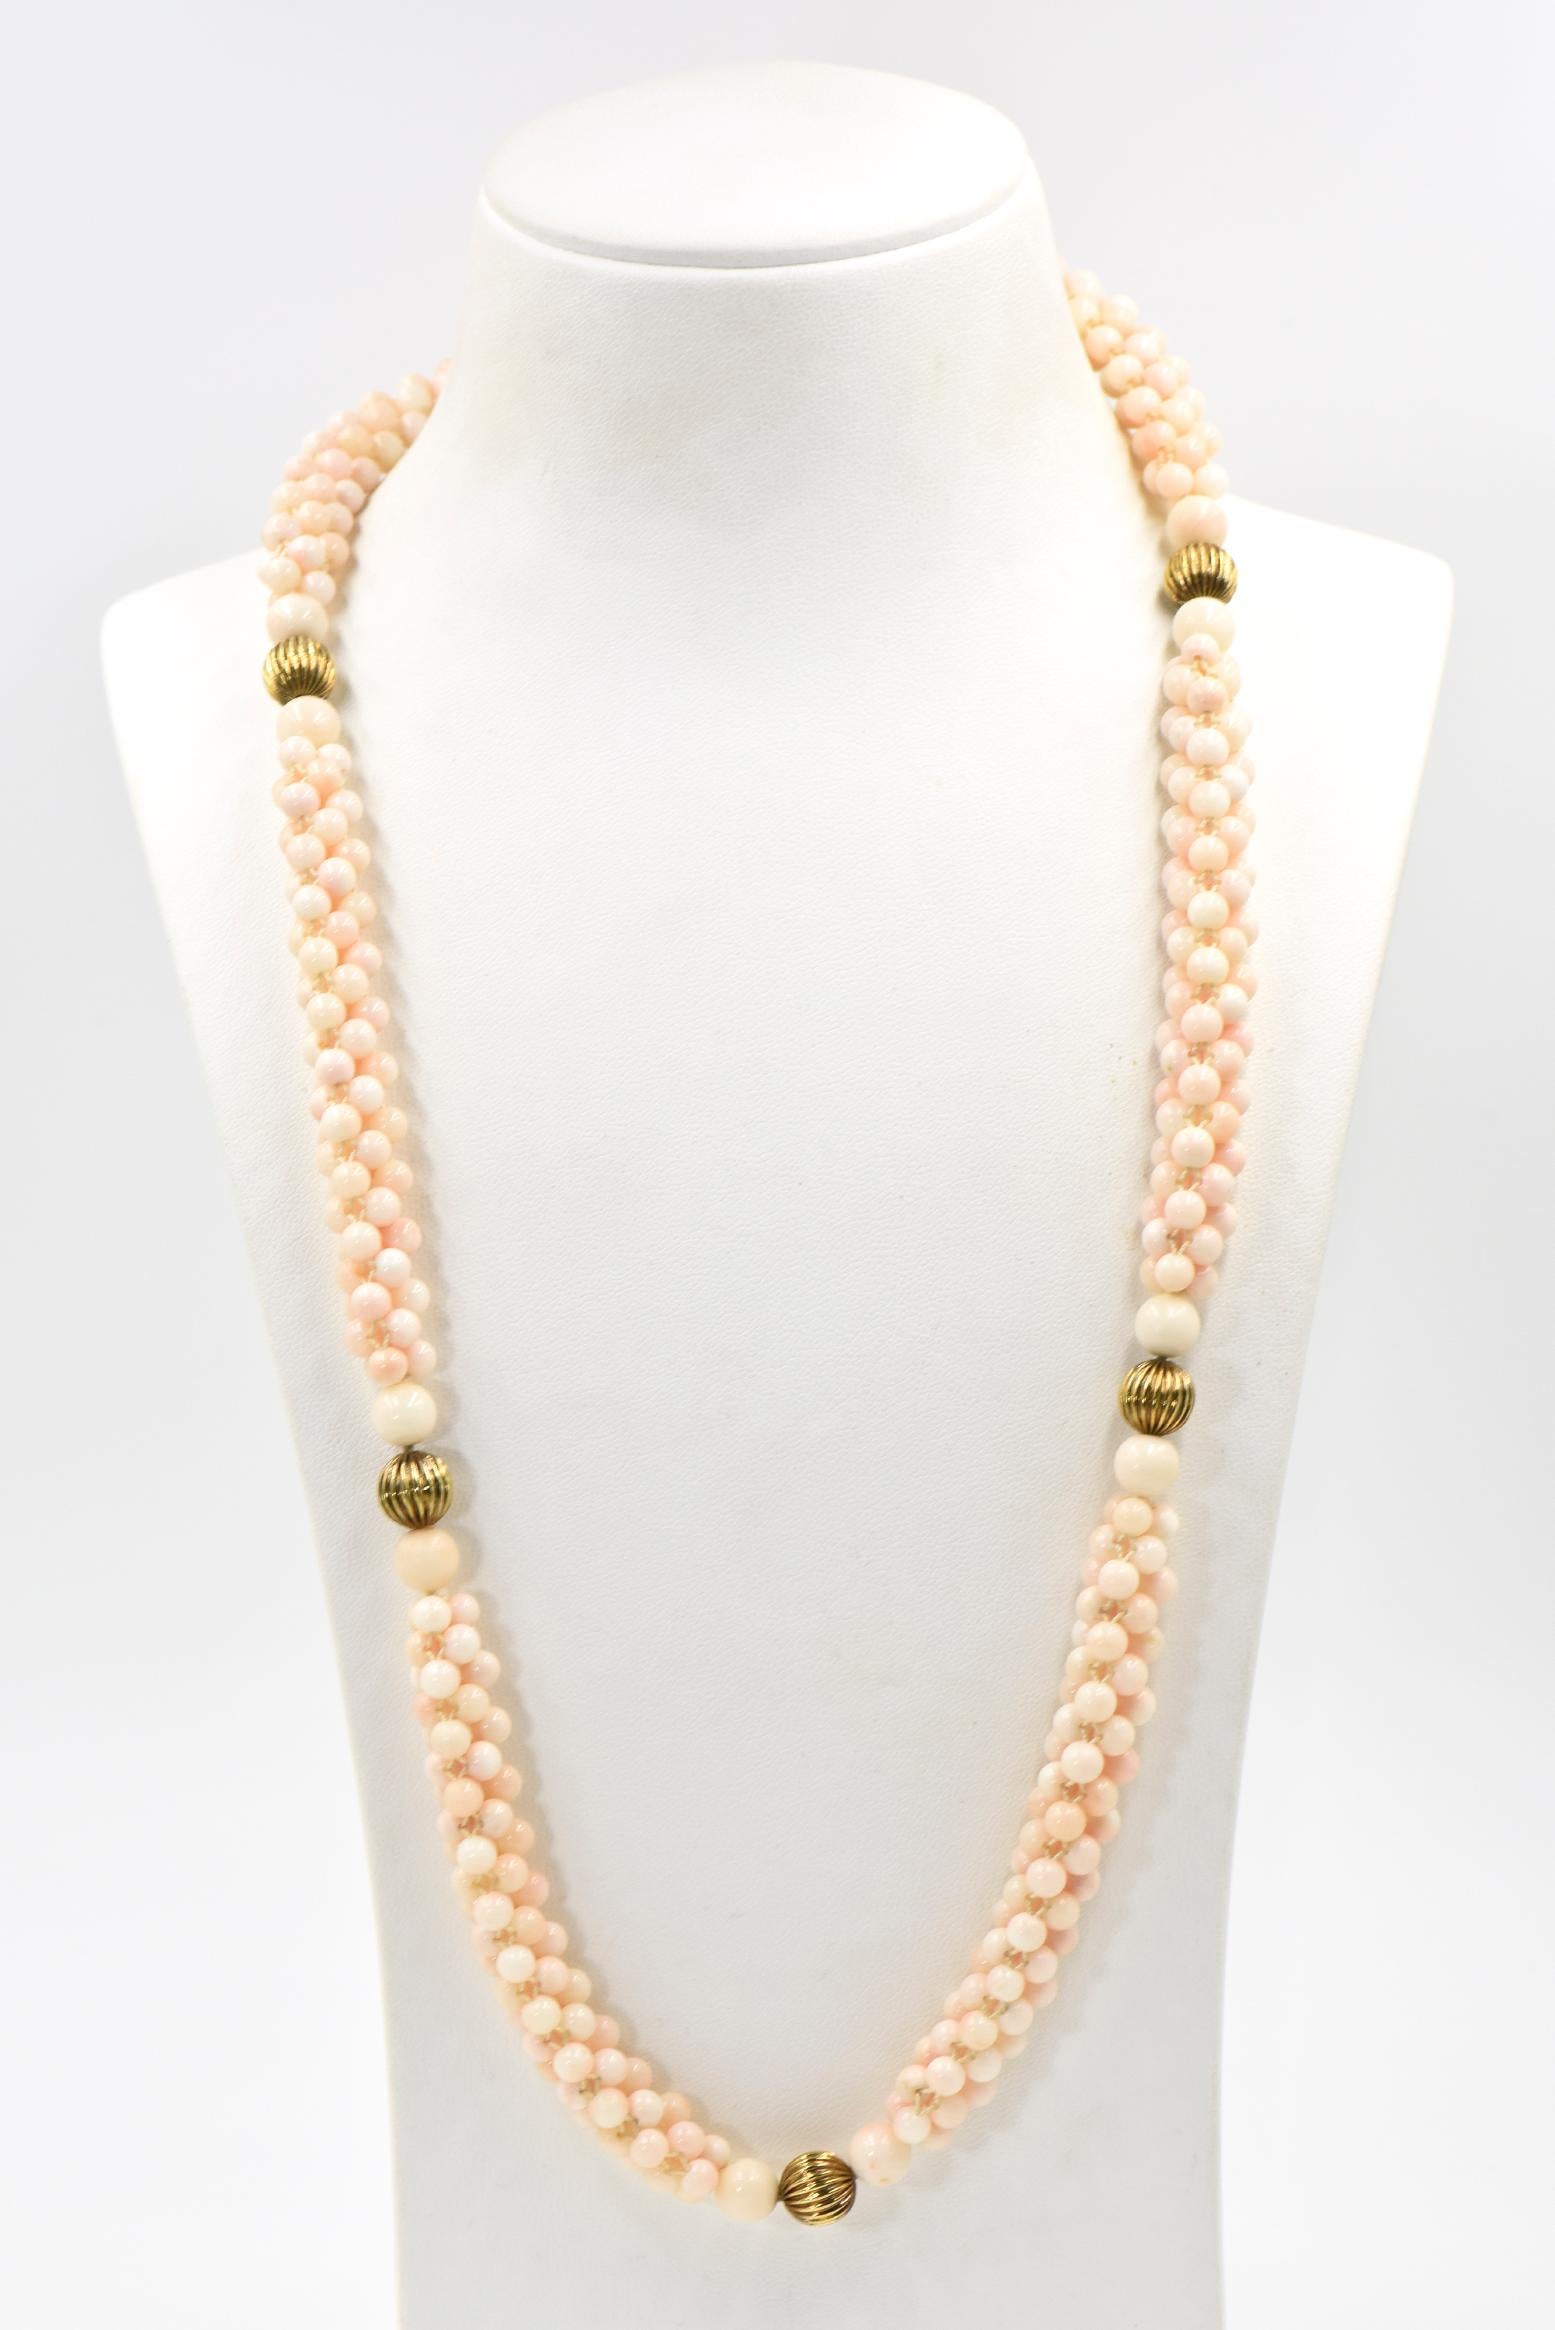 Finely woven light pink angel skin coral beads with ribbed 14k yellow gold bead accents and a tubular 14k matte and shiny finished clasp.  The clasp has 2 balls you line up and then twist to close and open the pieces. The small coral beads are